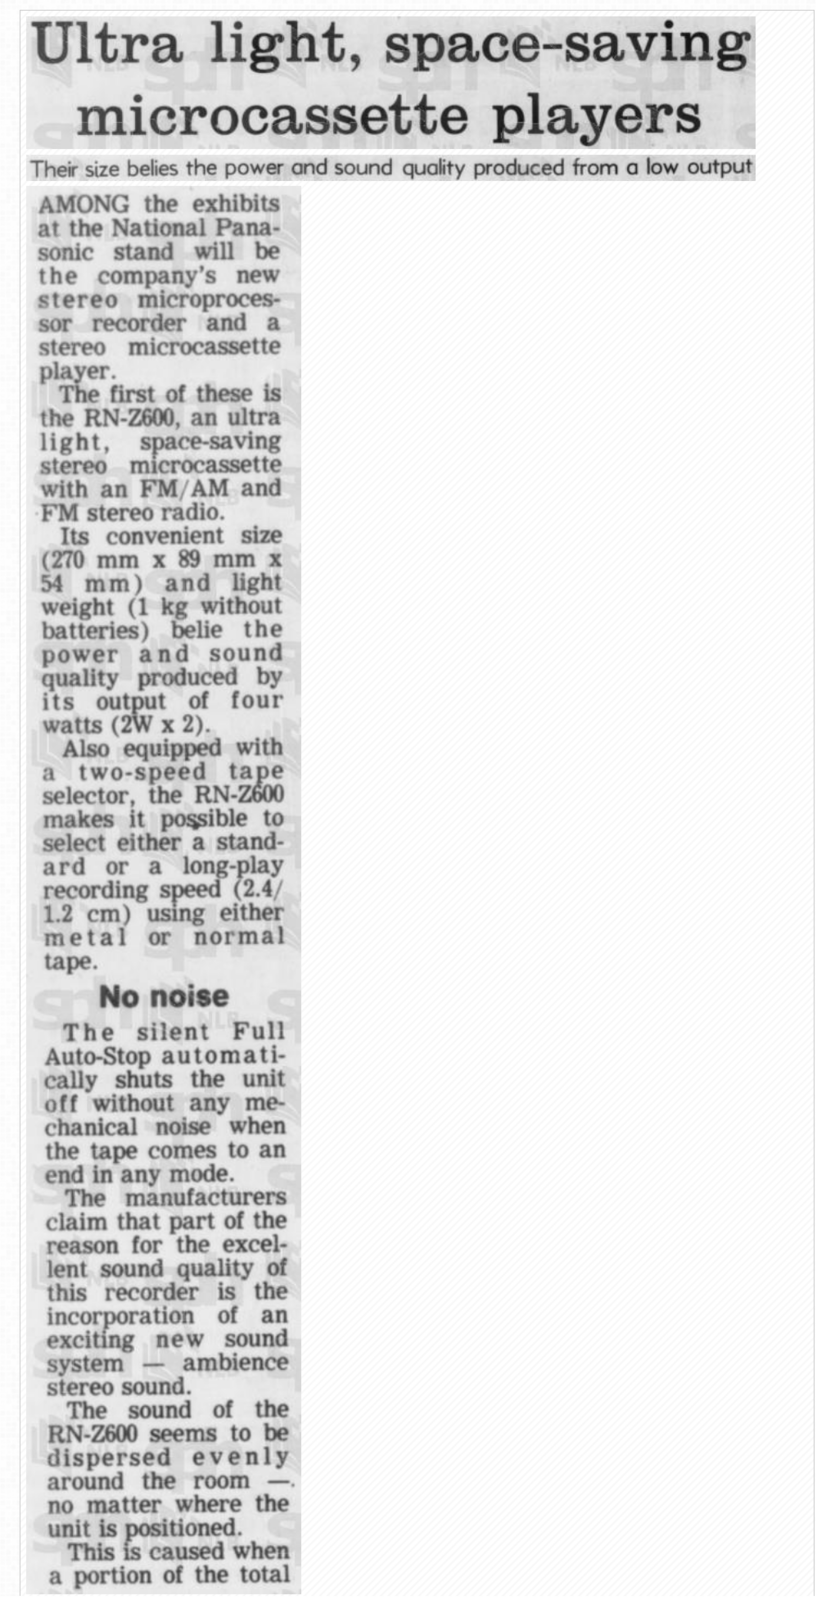 Microcassettes The Straits Times 1981 1.png